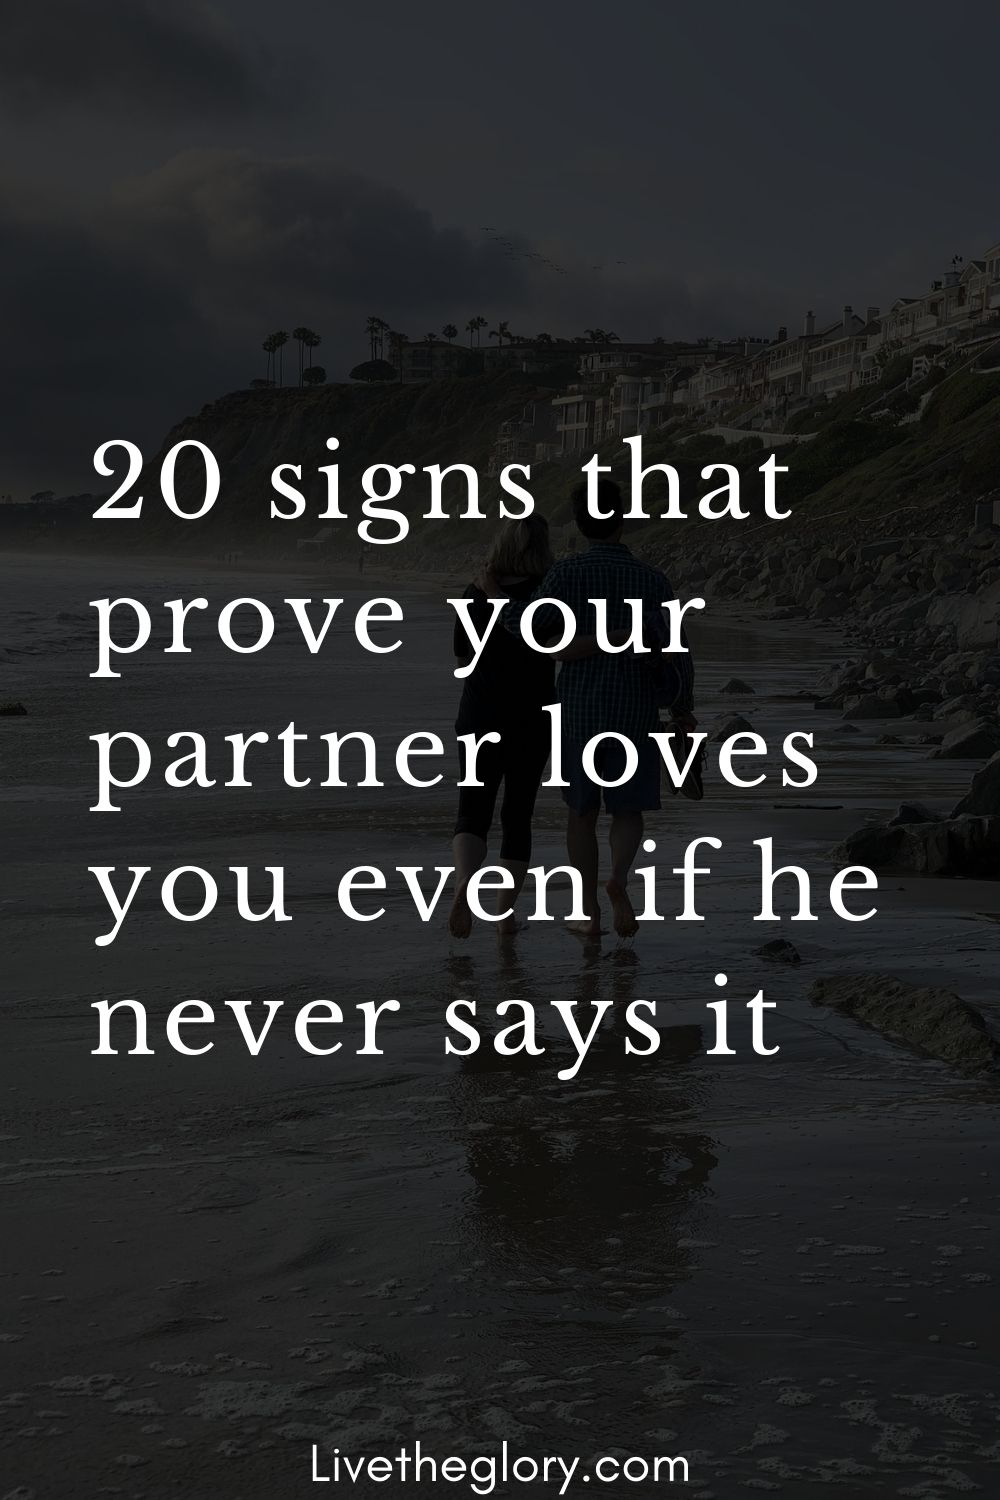 20 signs that prove your partner loves you even if he never says it ...